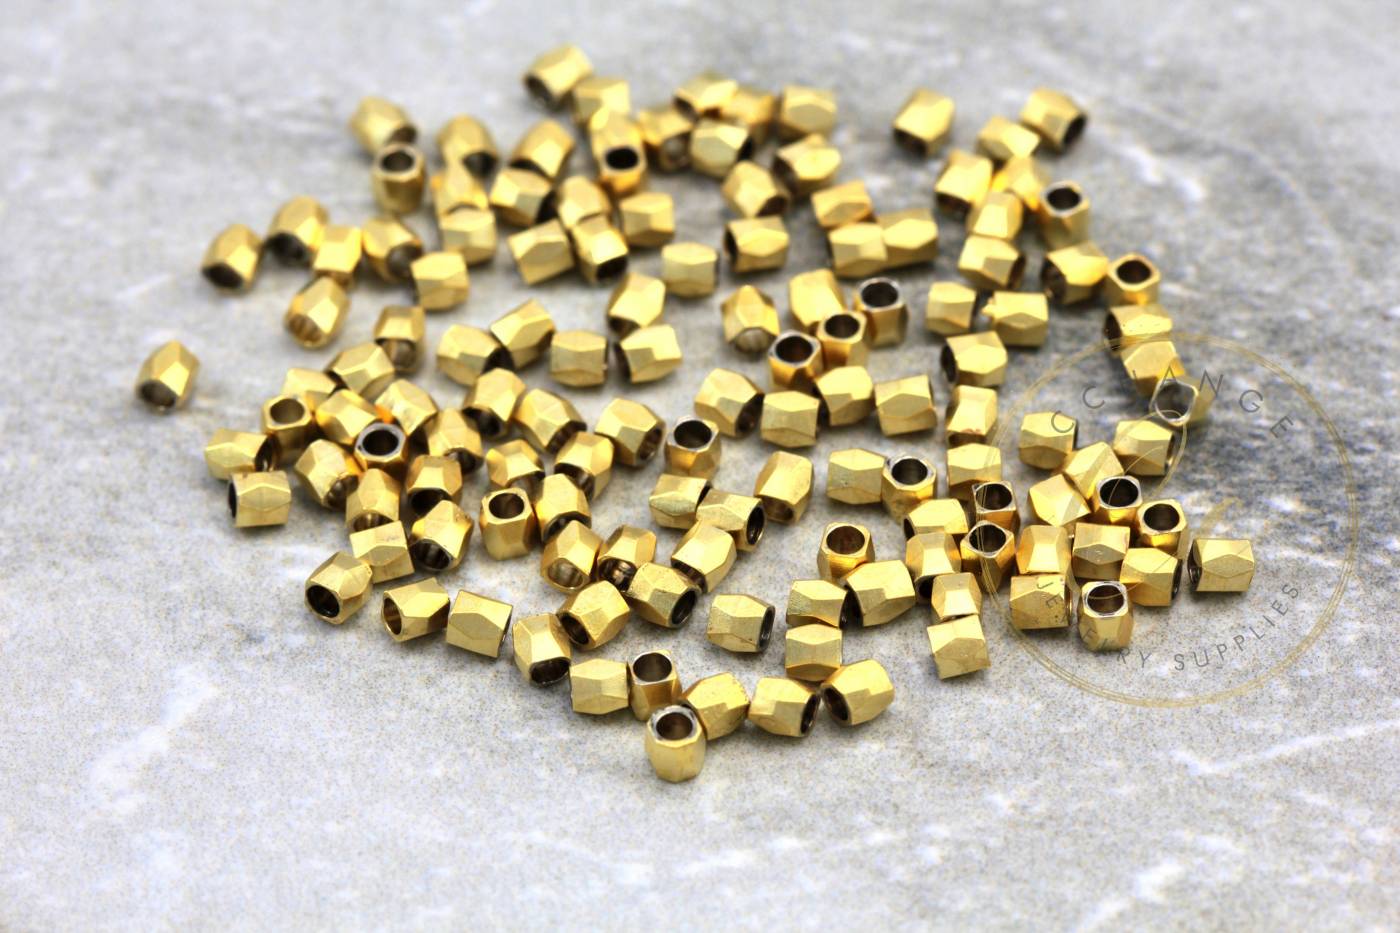 2mm-mini-brass-spacer-bead-findings